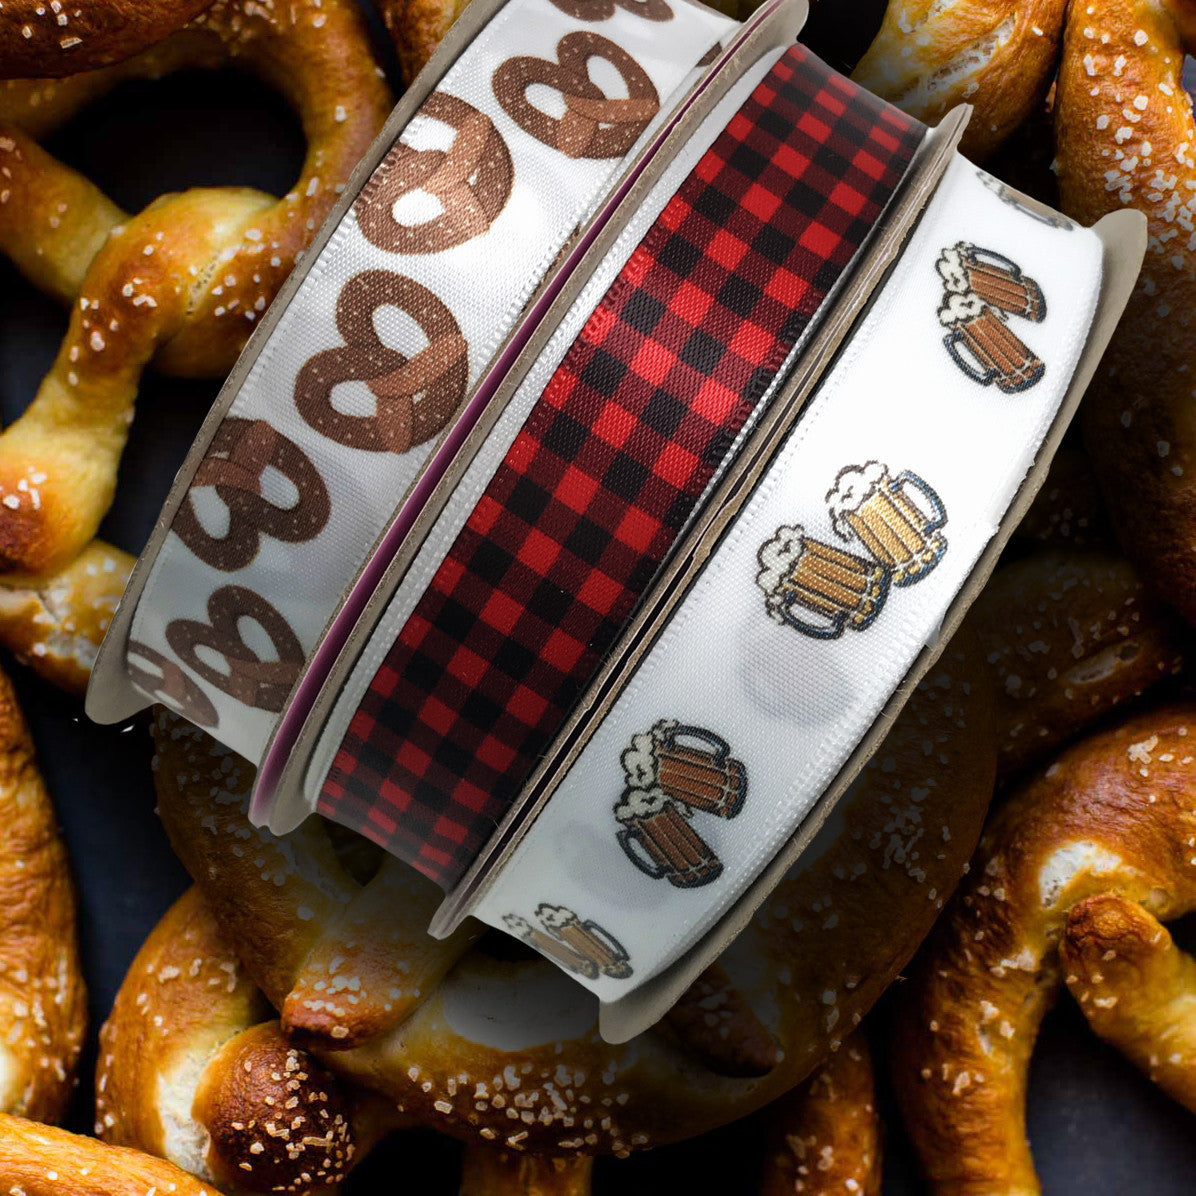 There's nothing like pretzels and beer! Pair these with our buffalo plaid ribbon for a fun bachelor or sports themed party!